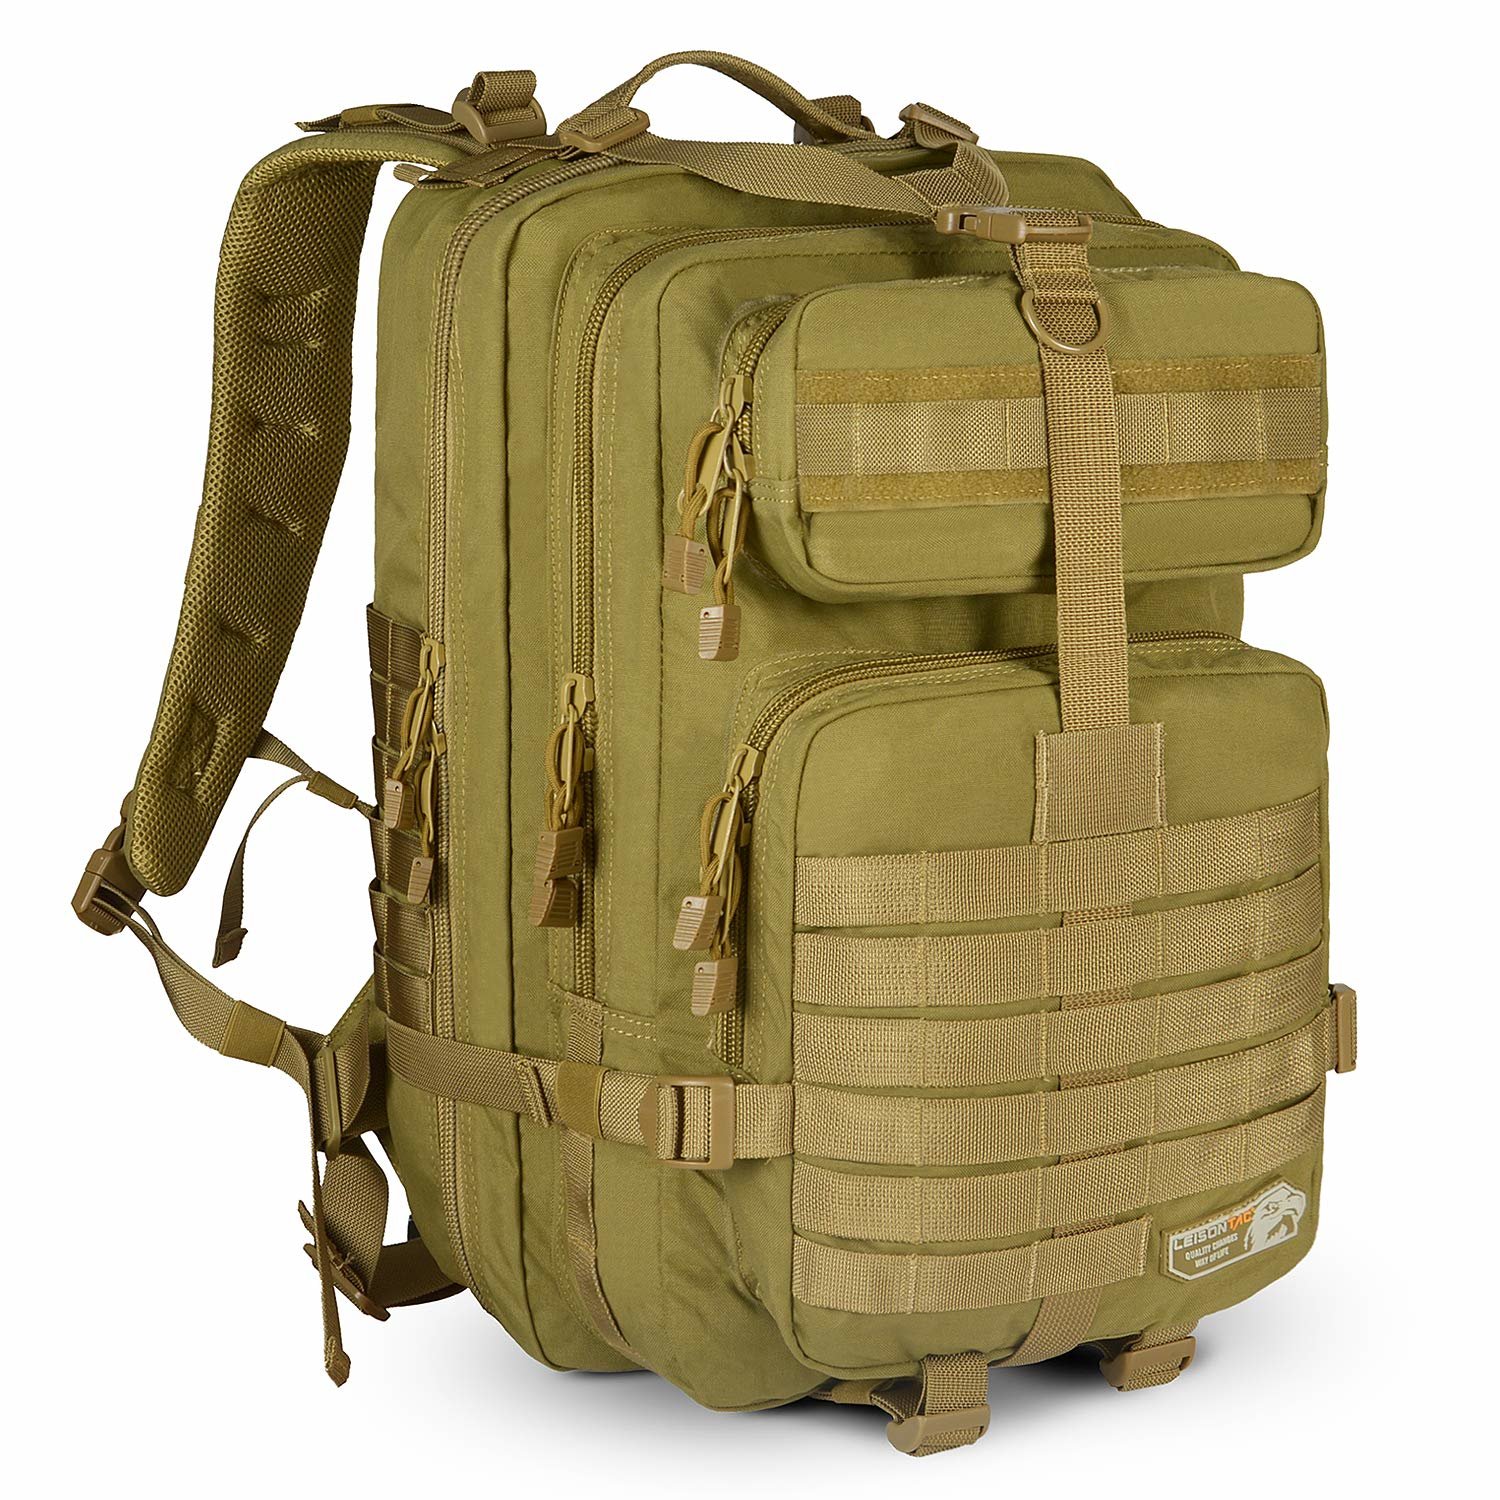 3 Day Military & Hiking Tactical Backpack - Tactical & Military Surplus